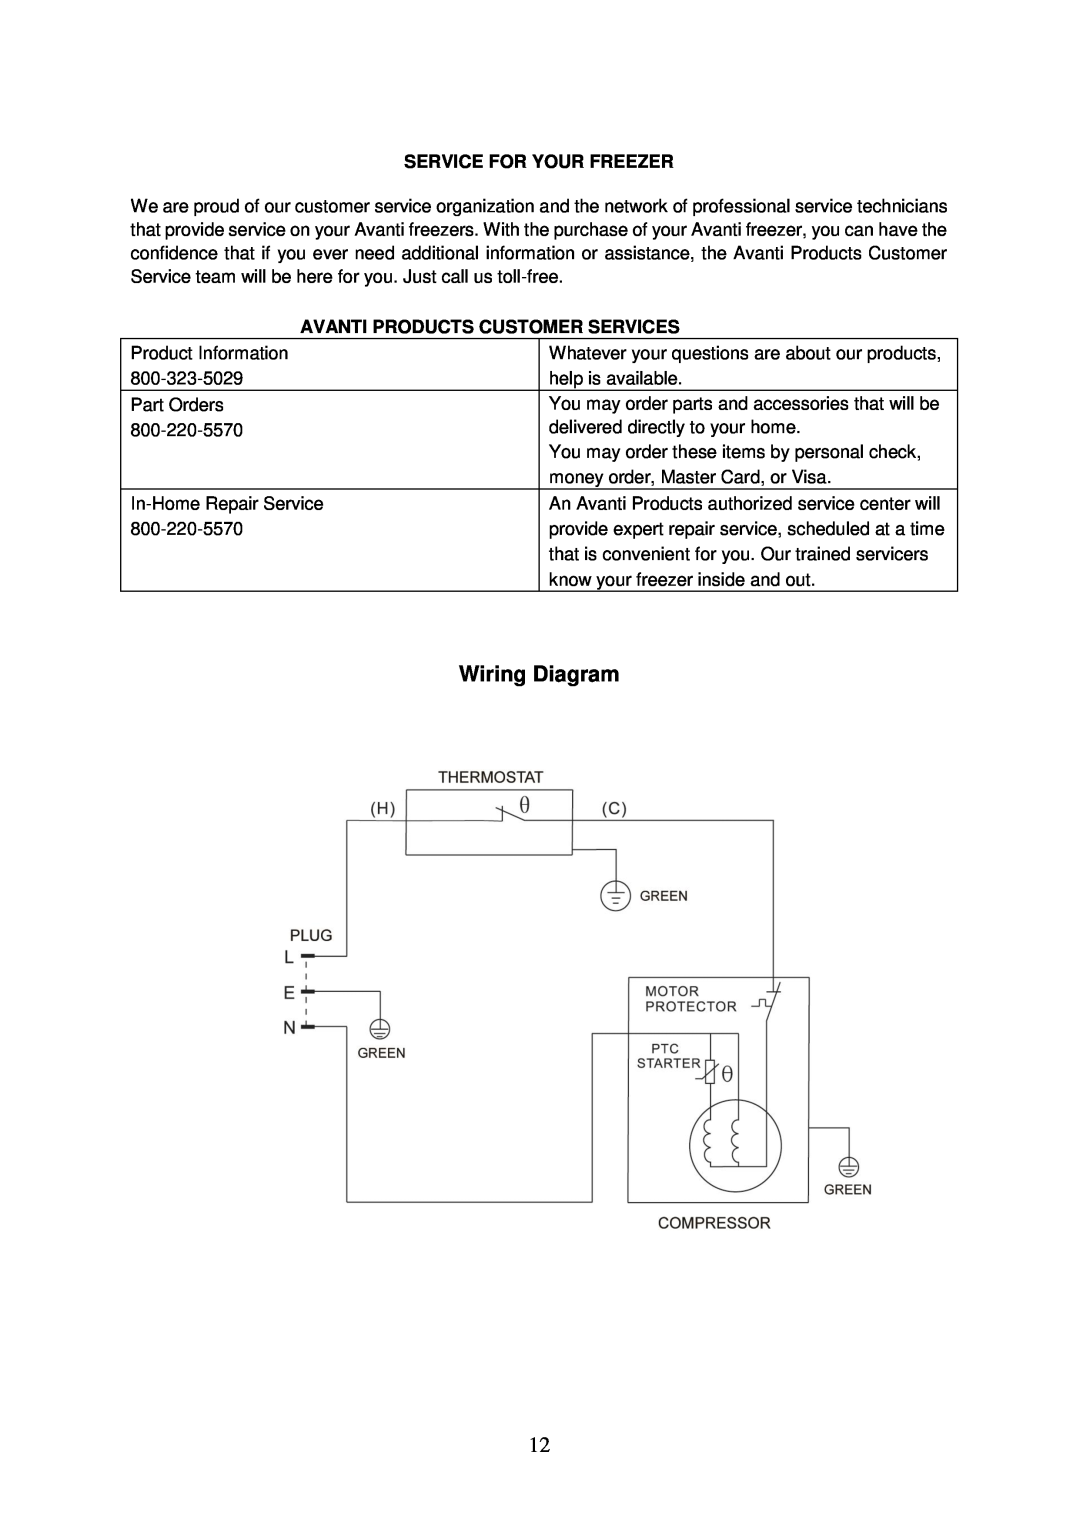 Avanti VF306 instruction manual Wiring Diagram, Service For Your Freezer, Avanti Products Customer Services 